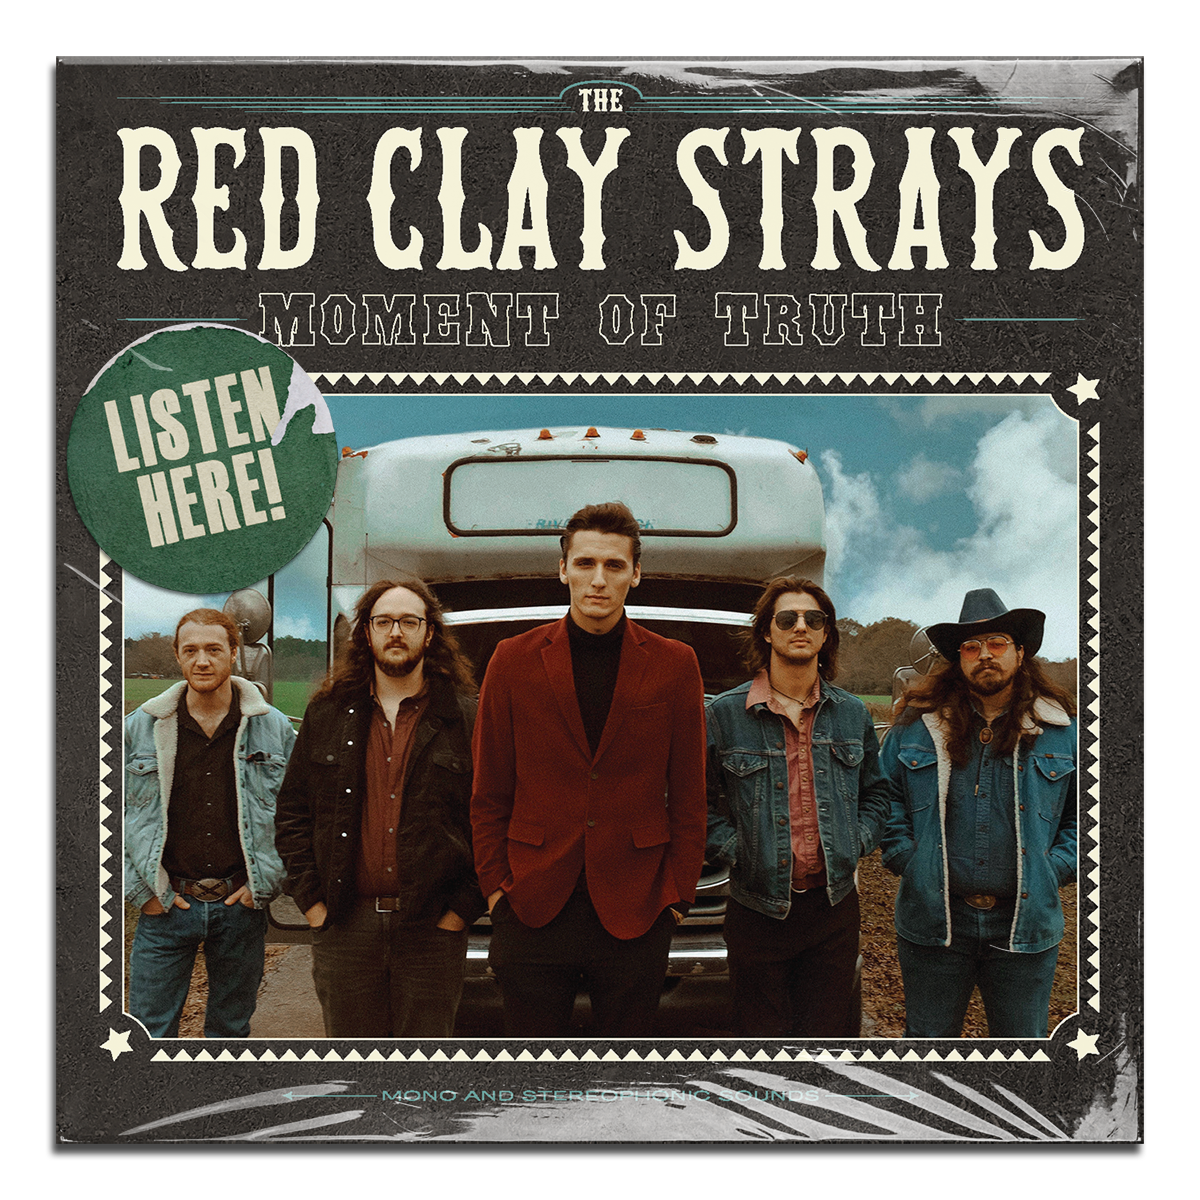 About — Red Clay Strays